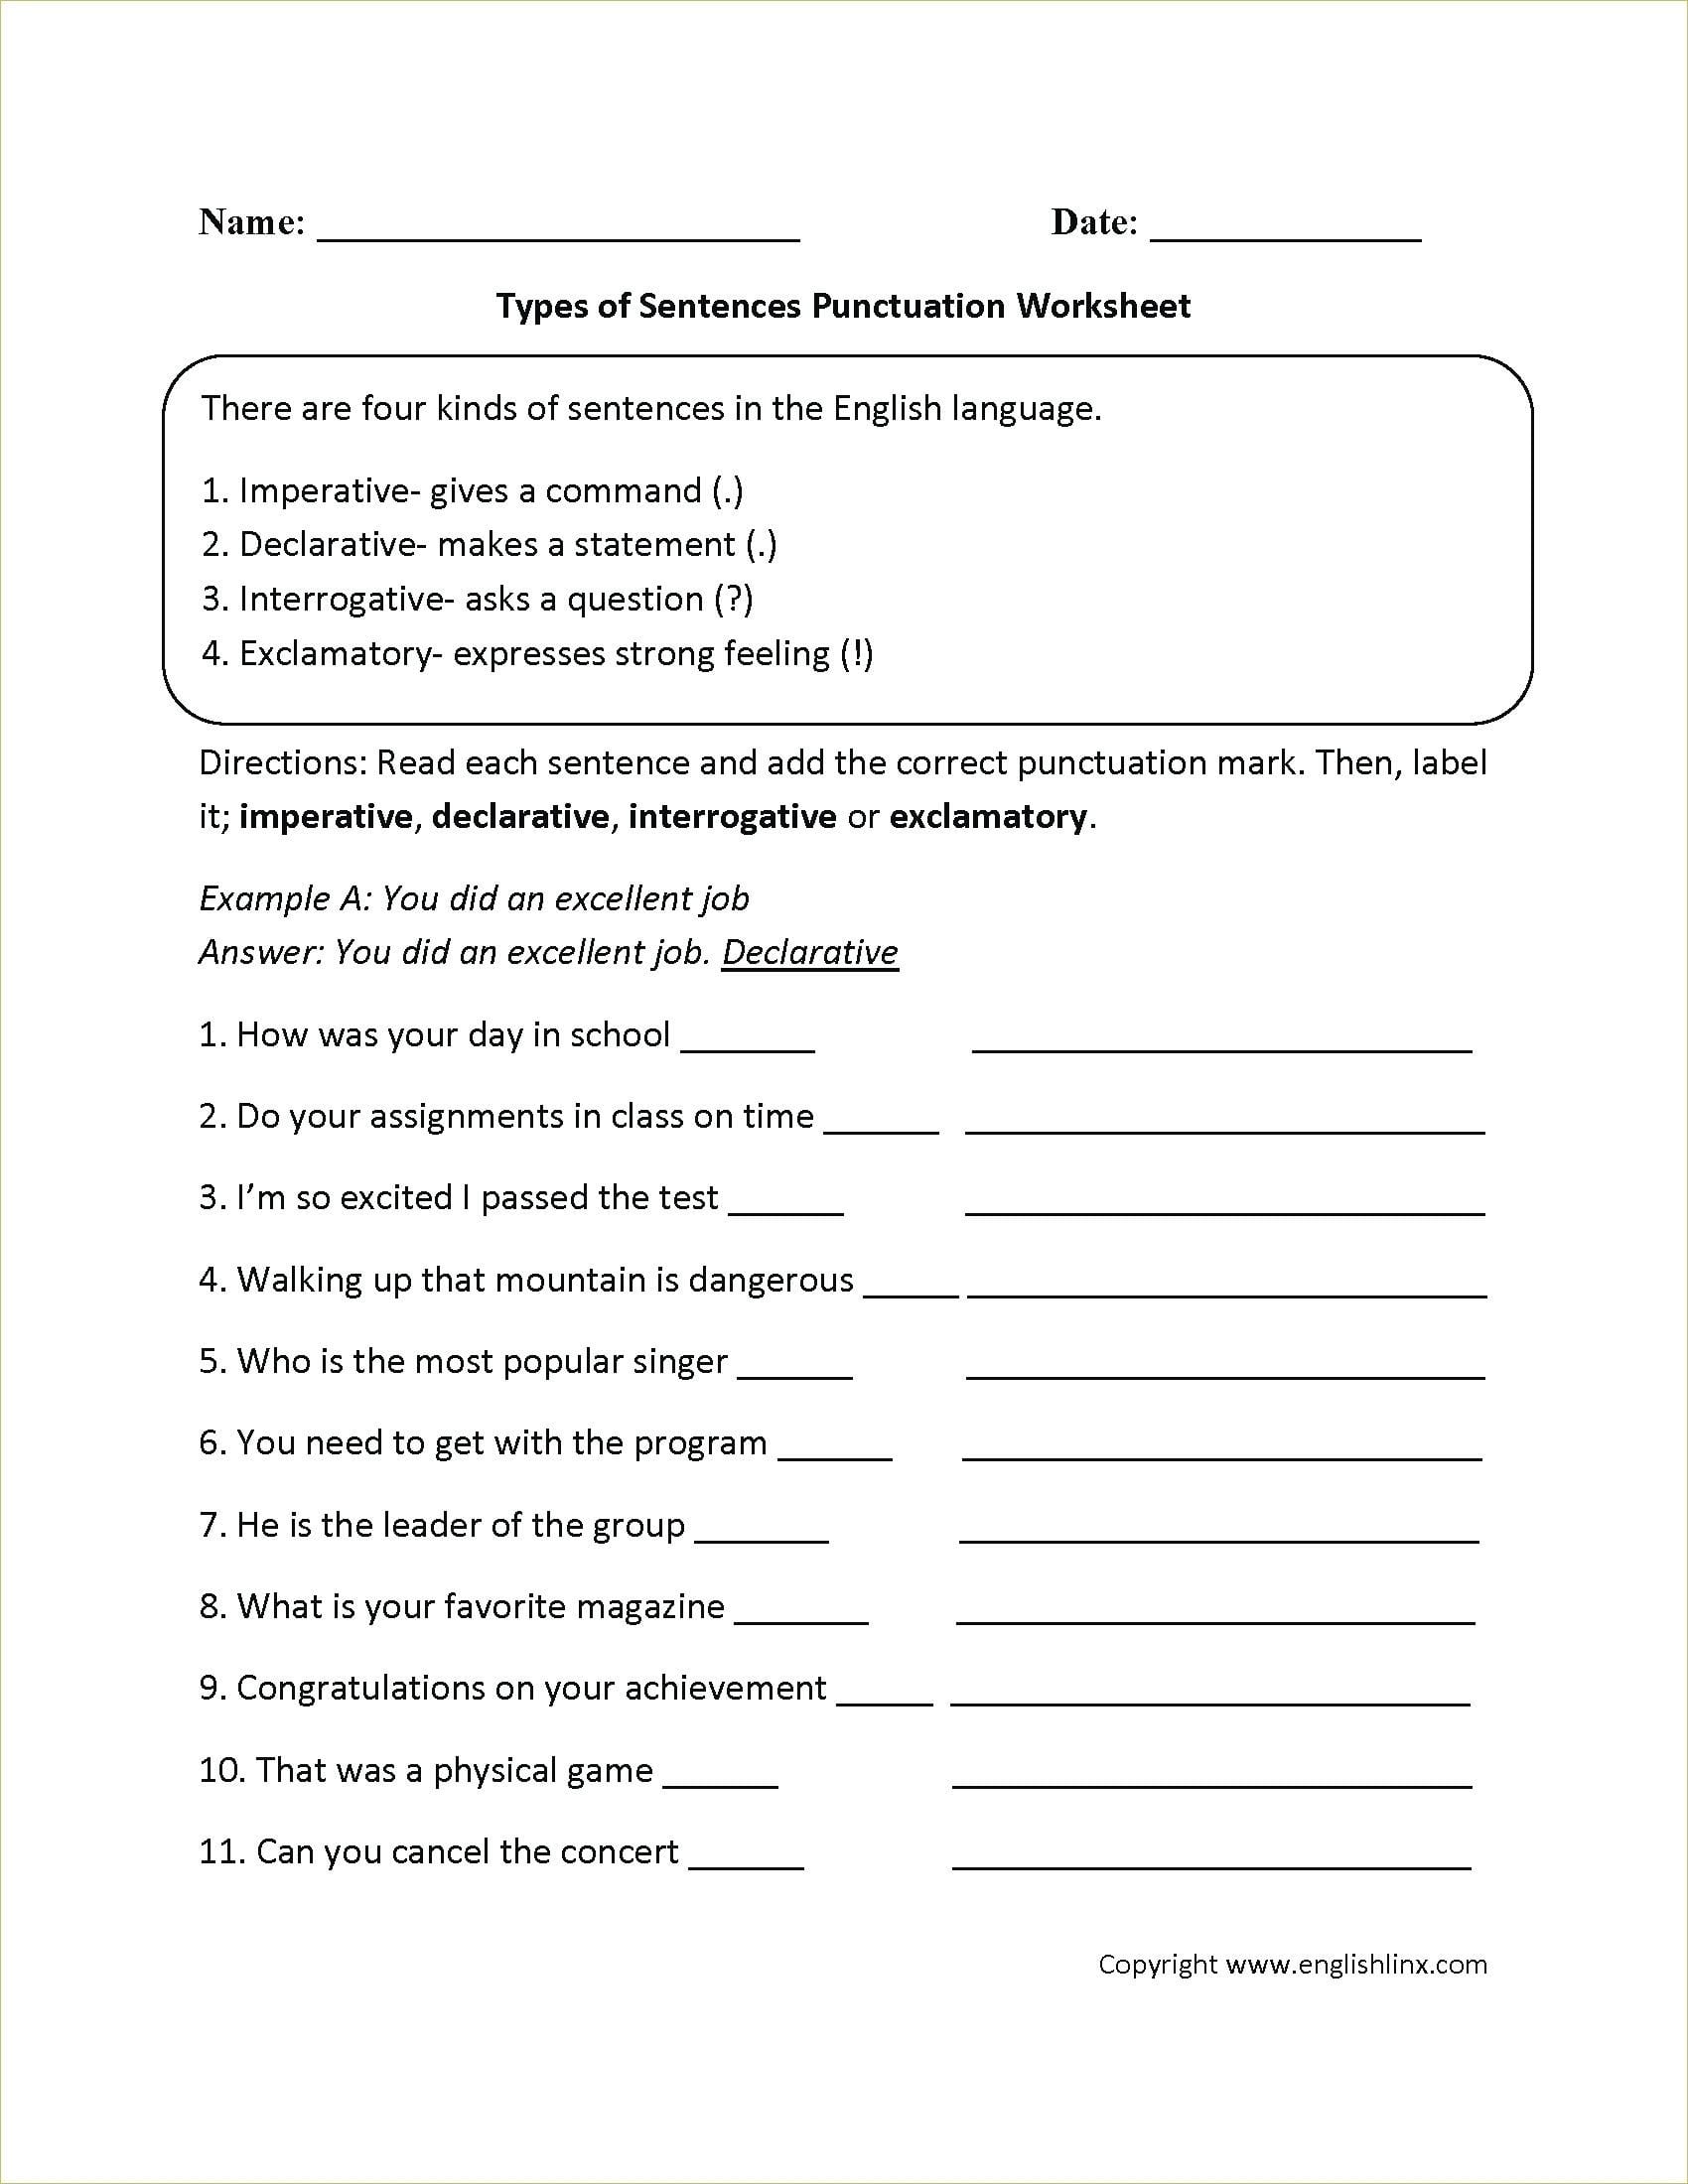 paragraph-editing-worksheets-for-4th-grade-writing-worksheets-editing-worksheets81-free